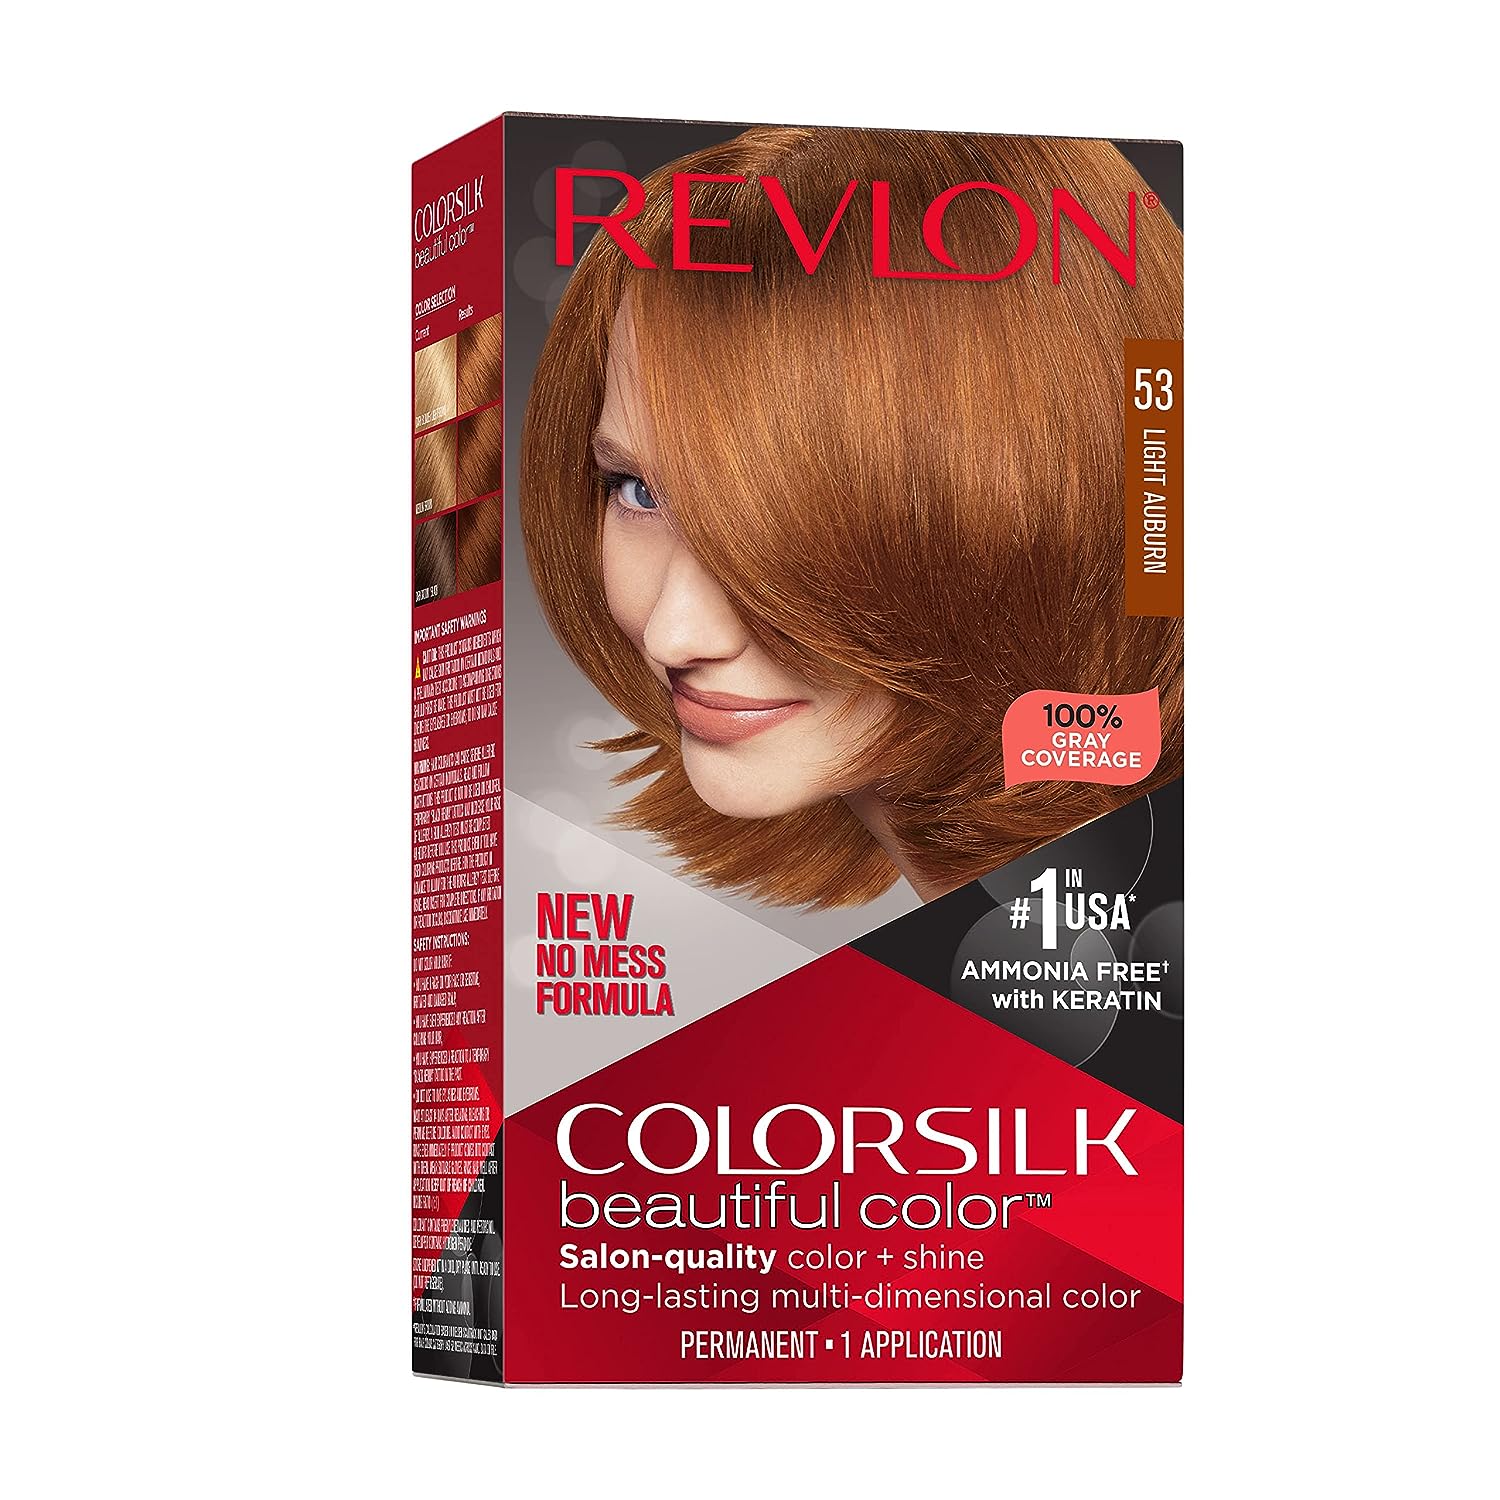 Revlon Colorsilk Beautiful Color Permanent Hair Color, Long-Lasting High-Definition Color, Shine & Silky Softness with 100% Gray Coverage, Ammonia Free, 053 Light Auburn, 1 Pack